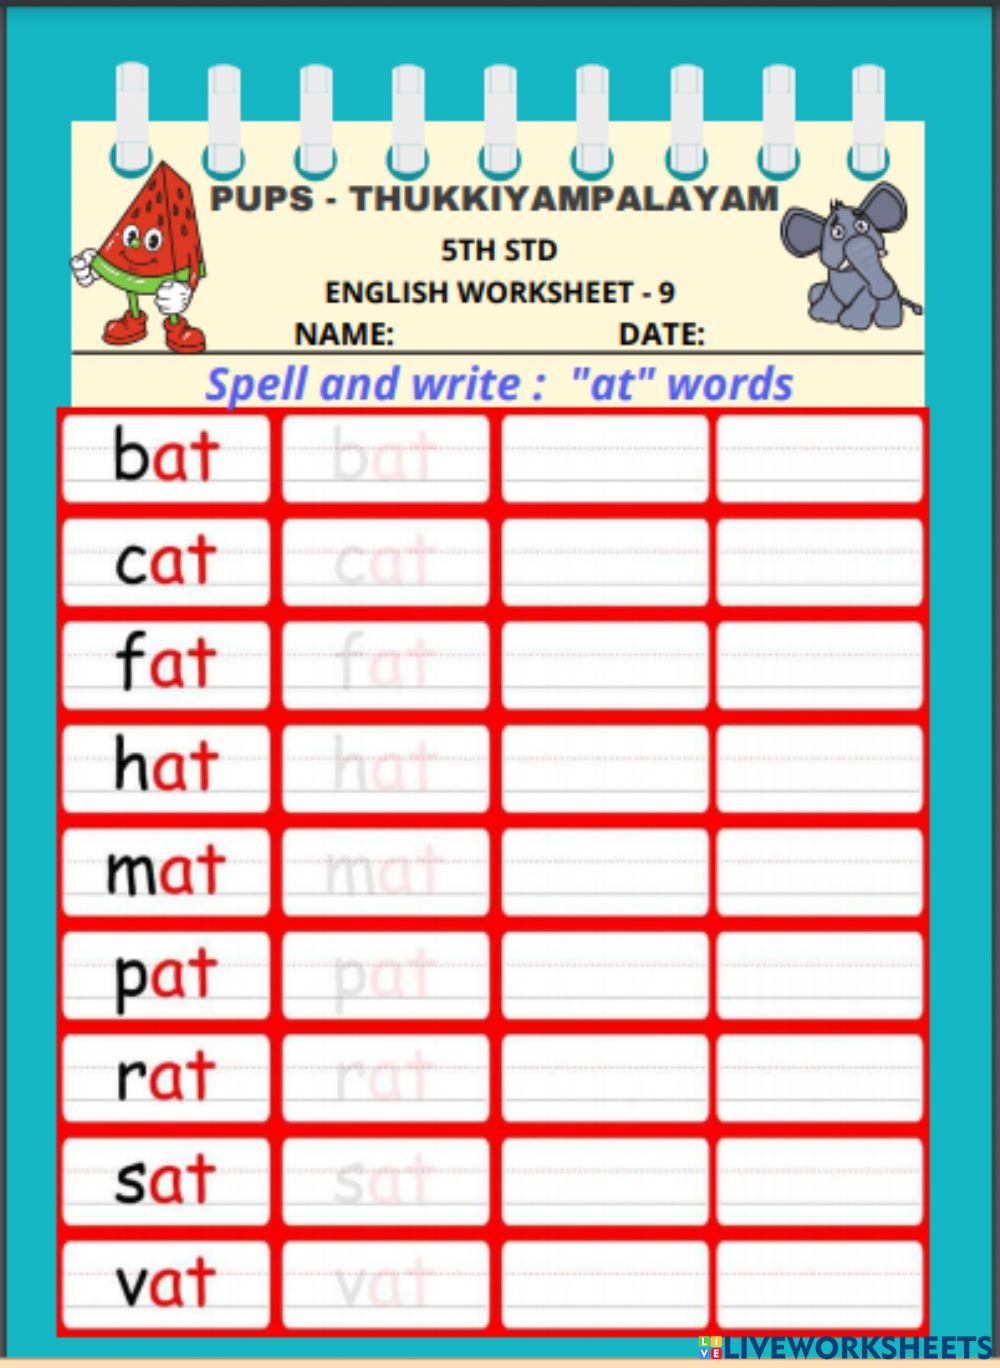 English 3 letter words - at words